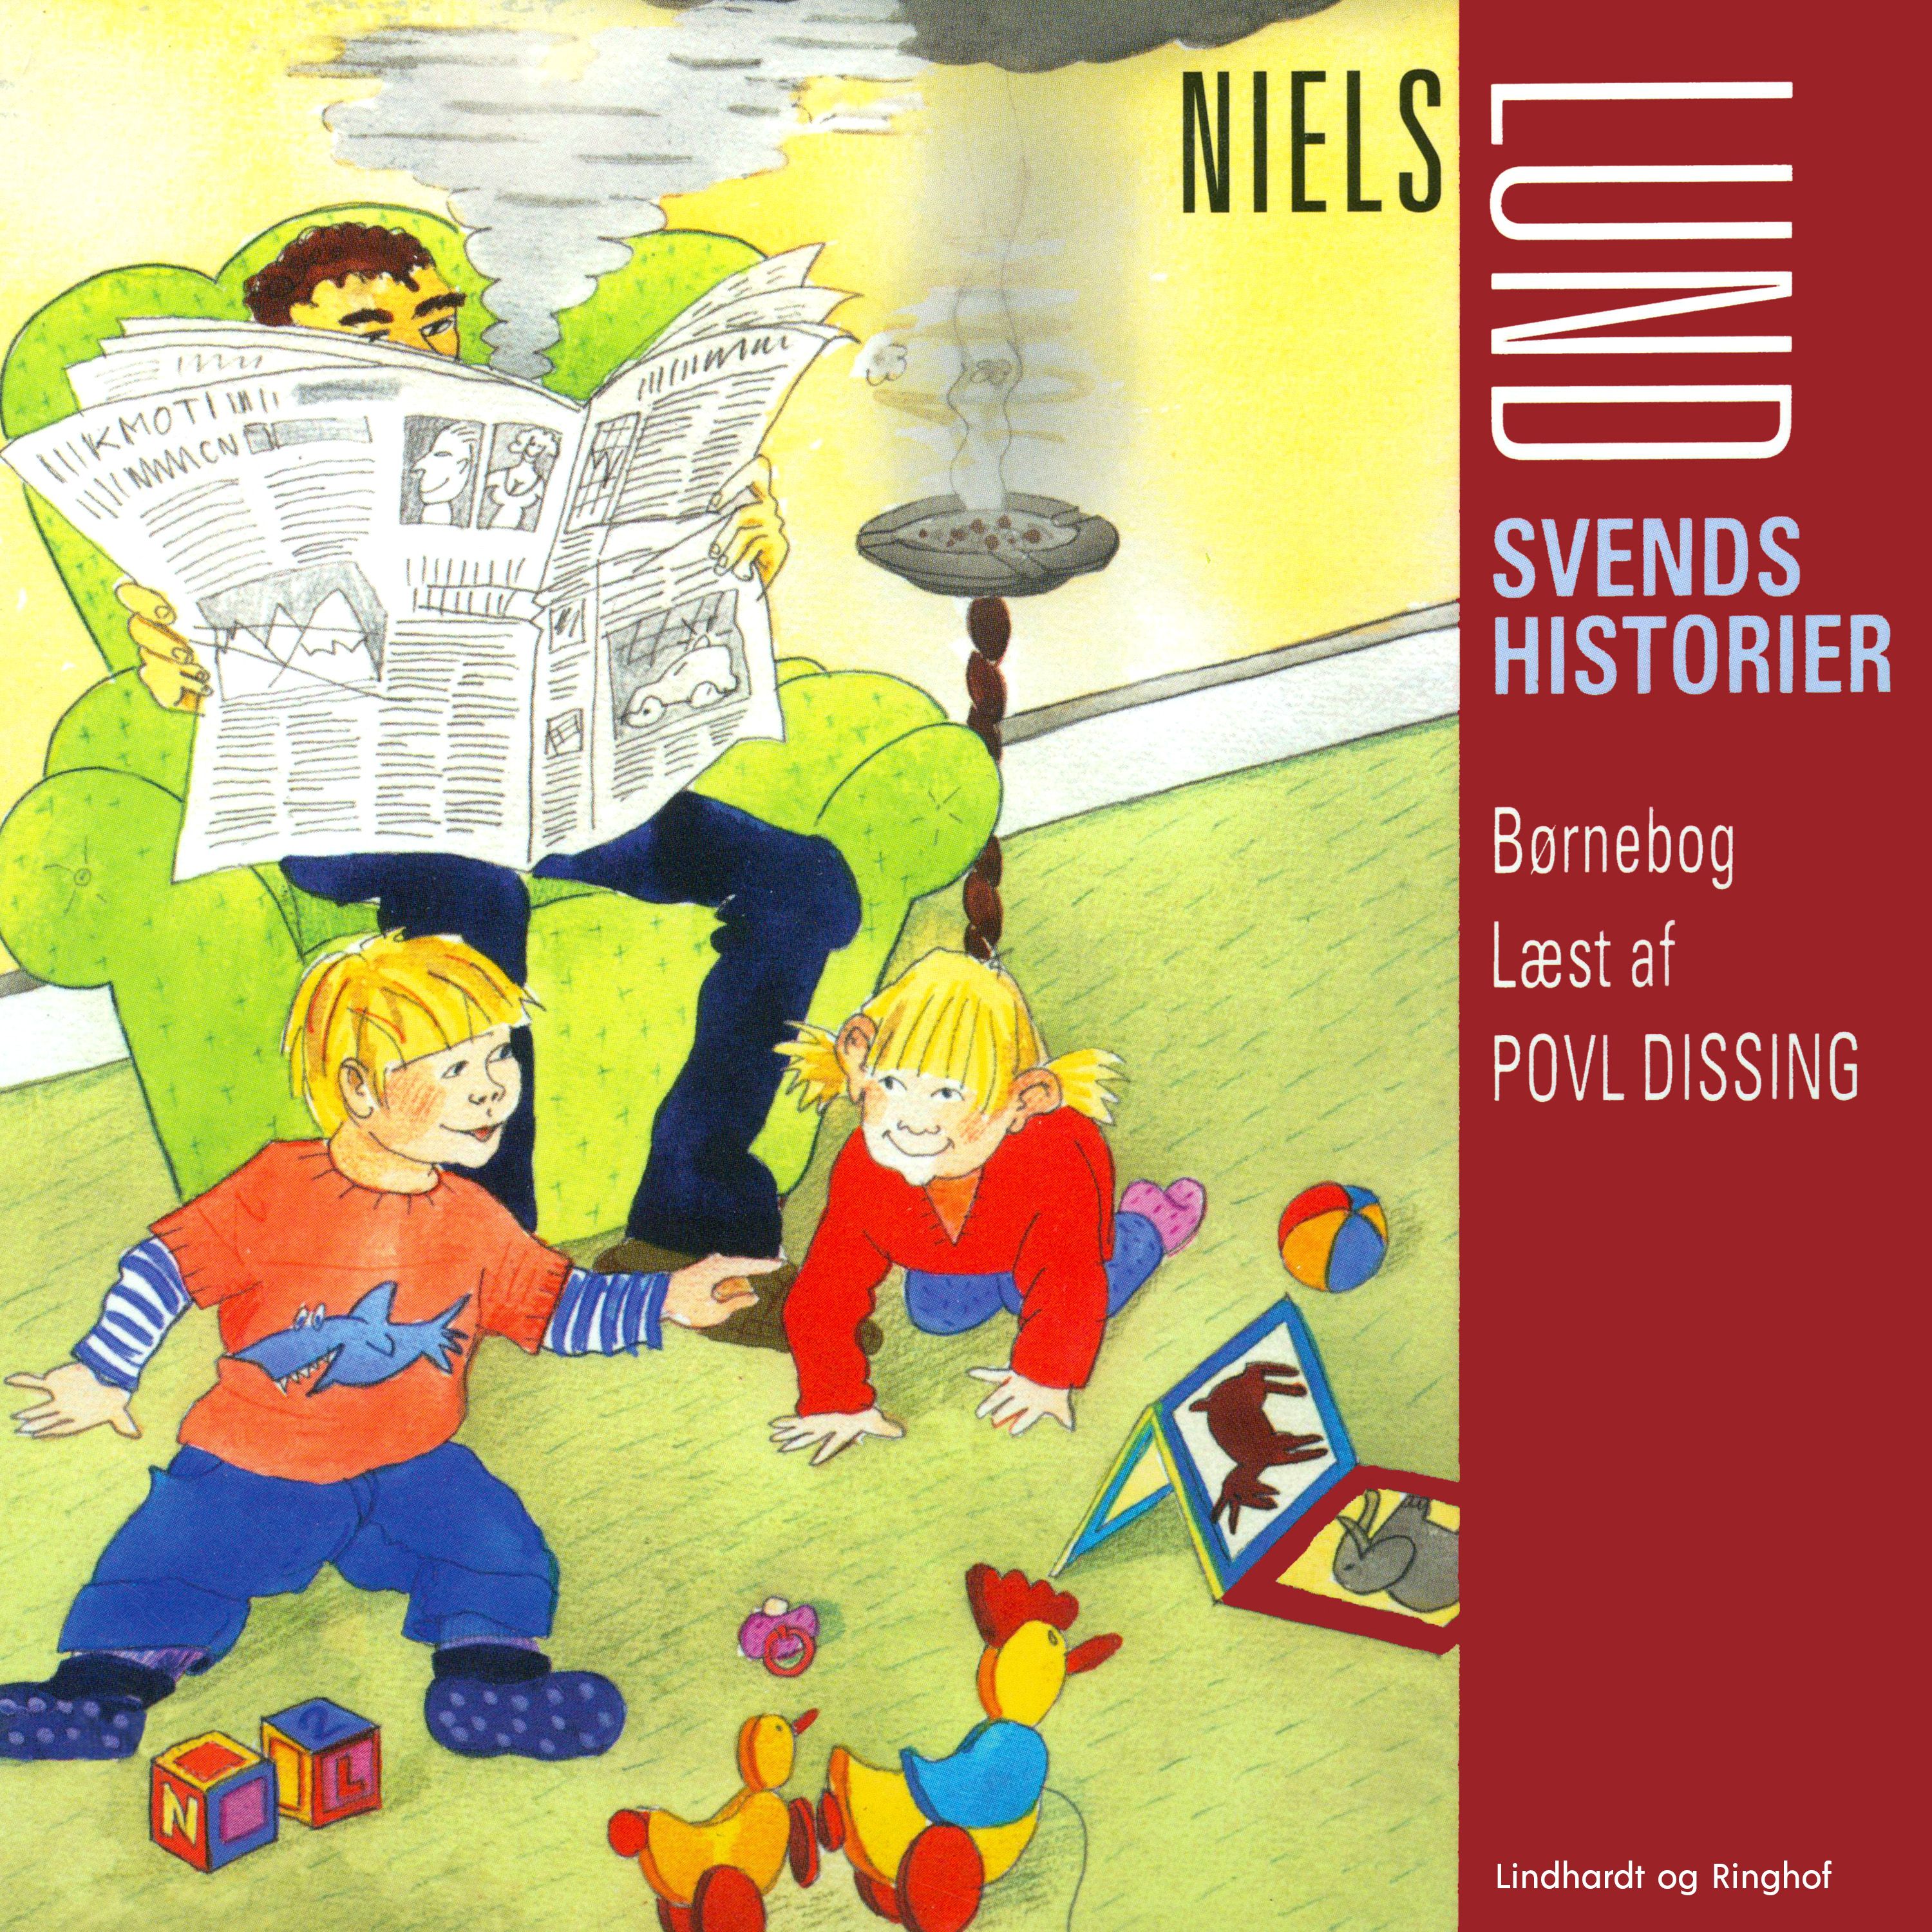 Svends historier, audiobook by Niels Lund